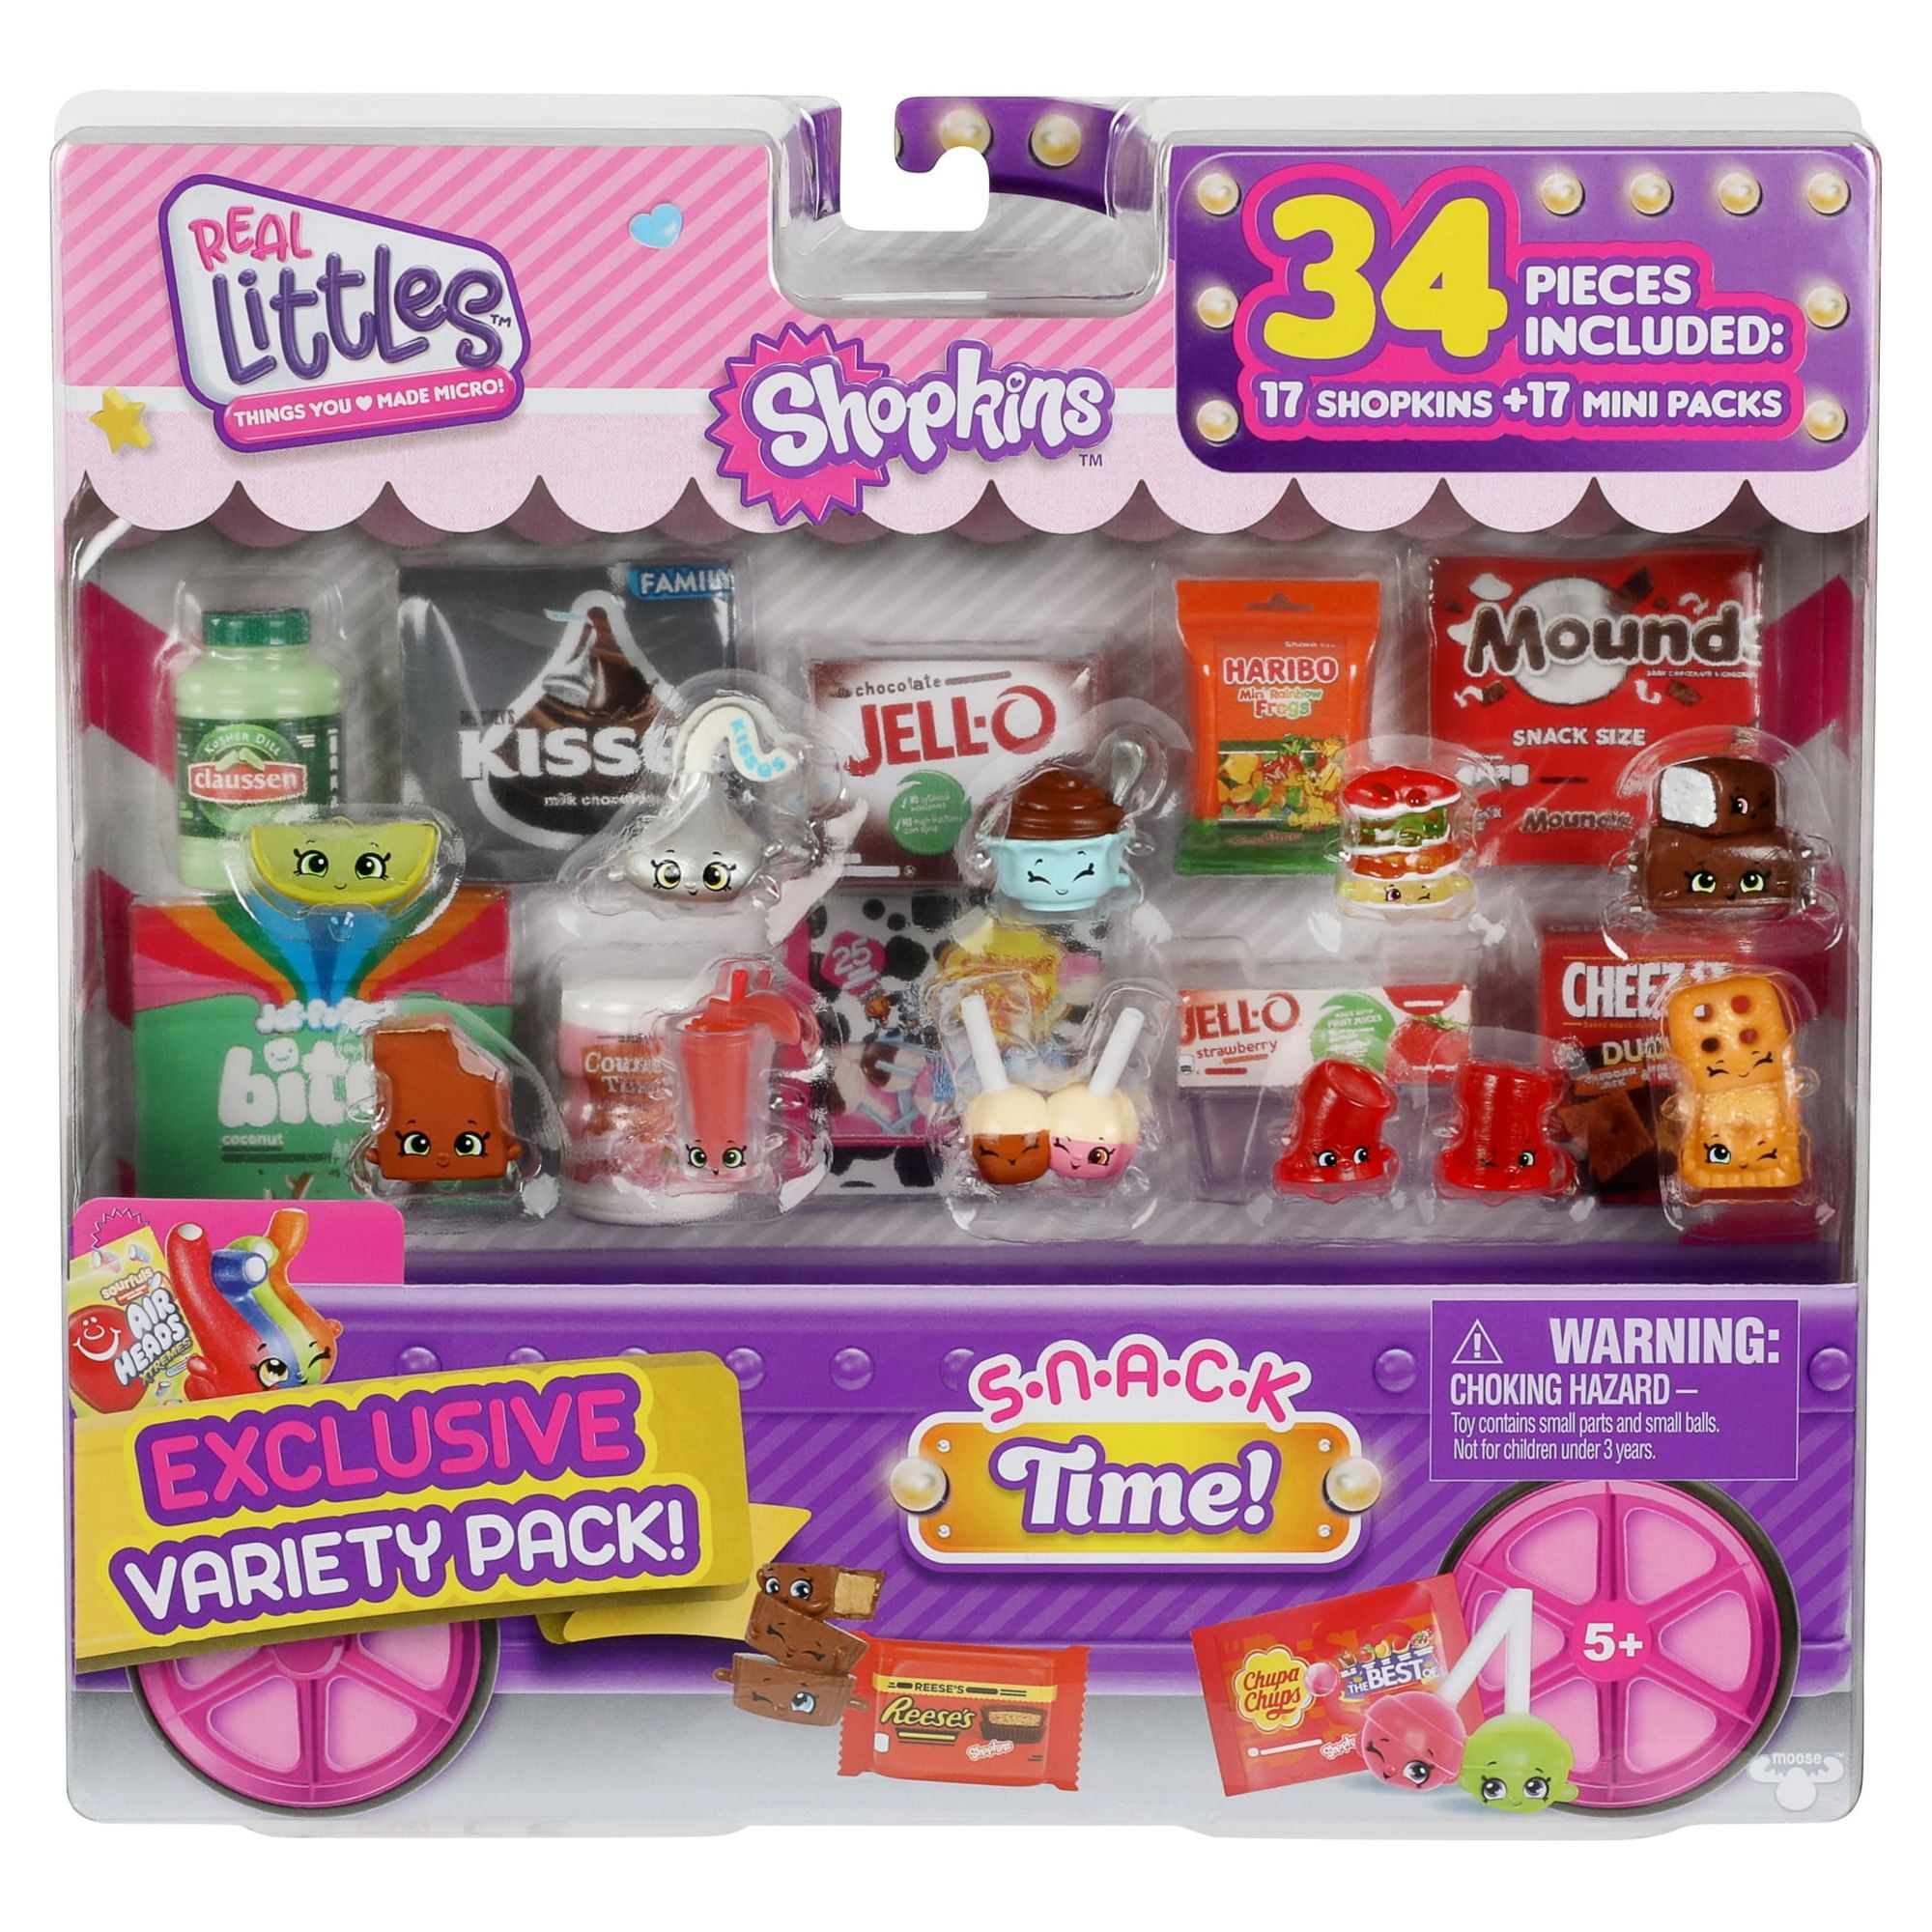 Shopkins Real Littles, Mini Pack 2 Shopkins Plus 2 Real Branded Mini Packs,  4 Total Pieces, Collectables, Colors and Styles May Vary, Girls, Ages 5+